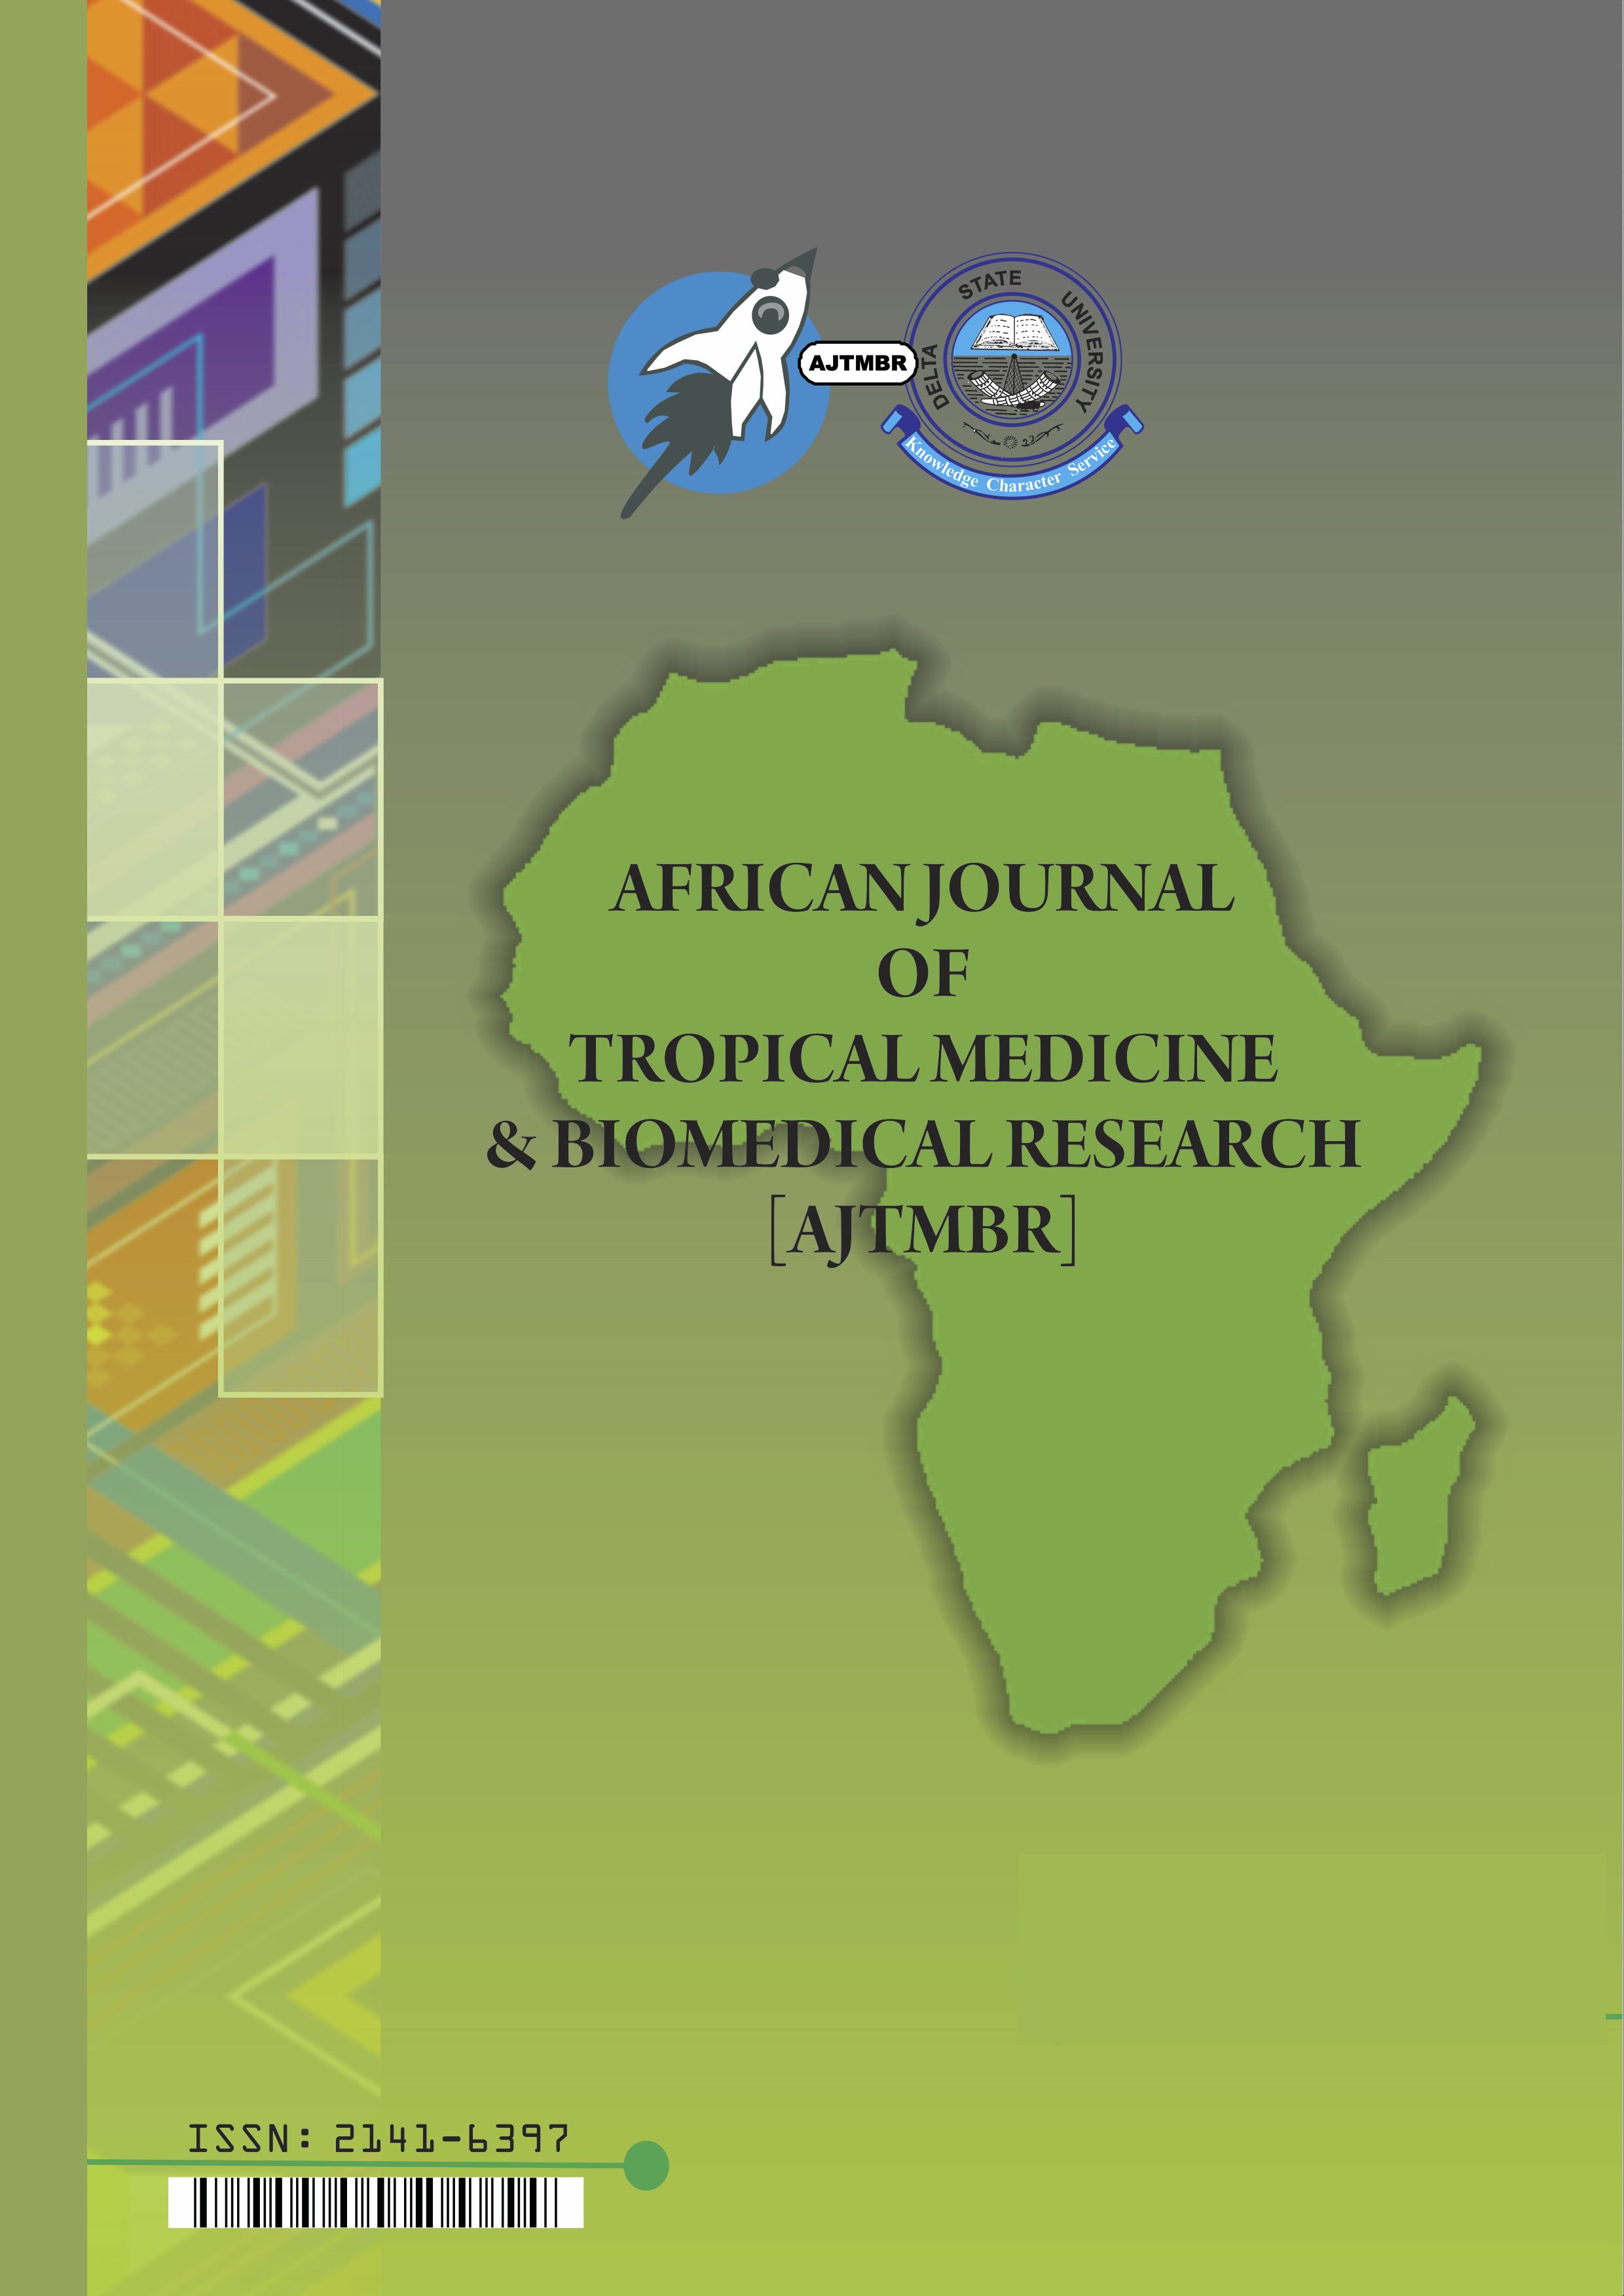 					View Vol. 3 No. 2: African Journal of Tropical Medicine and Biomedical Research; March 2017
				